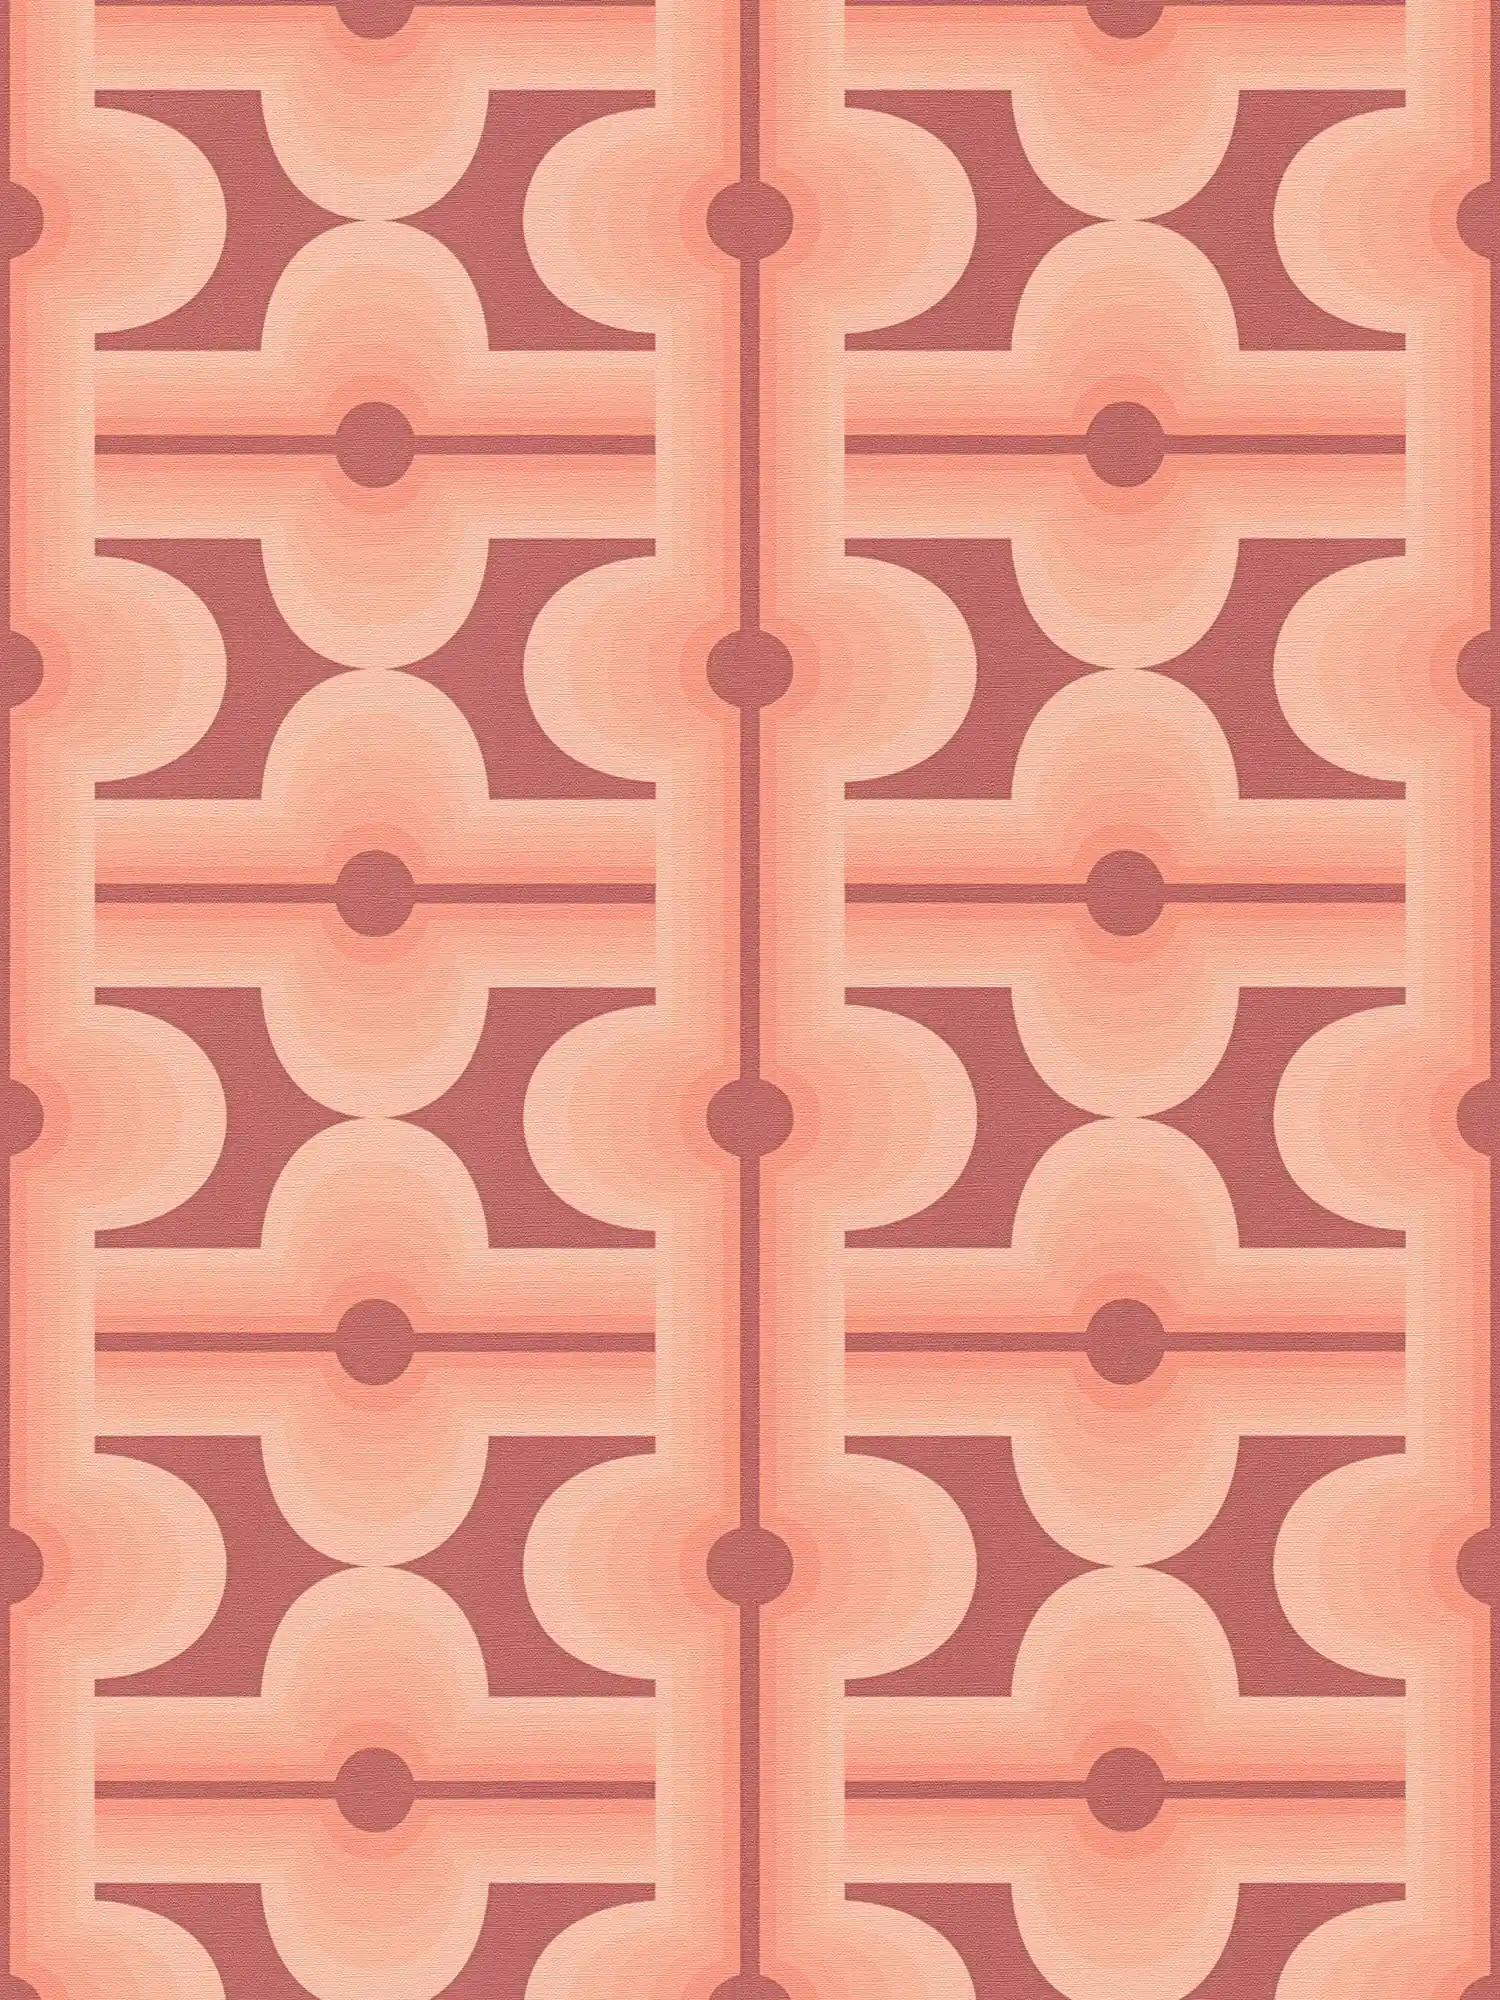 Abstract patterned non-woven wallpaper in retro style - red, orange
